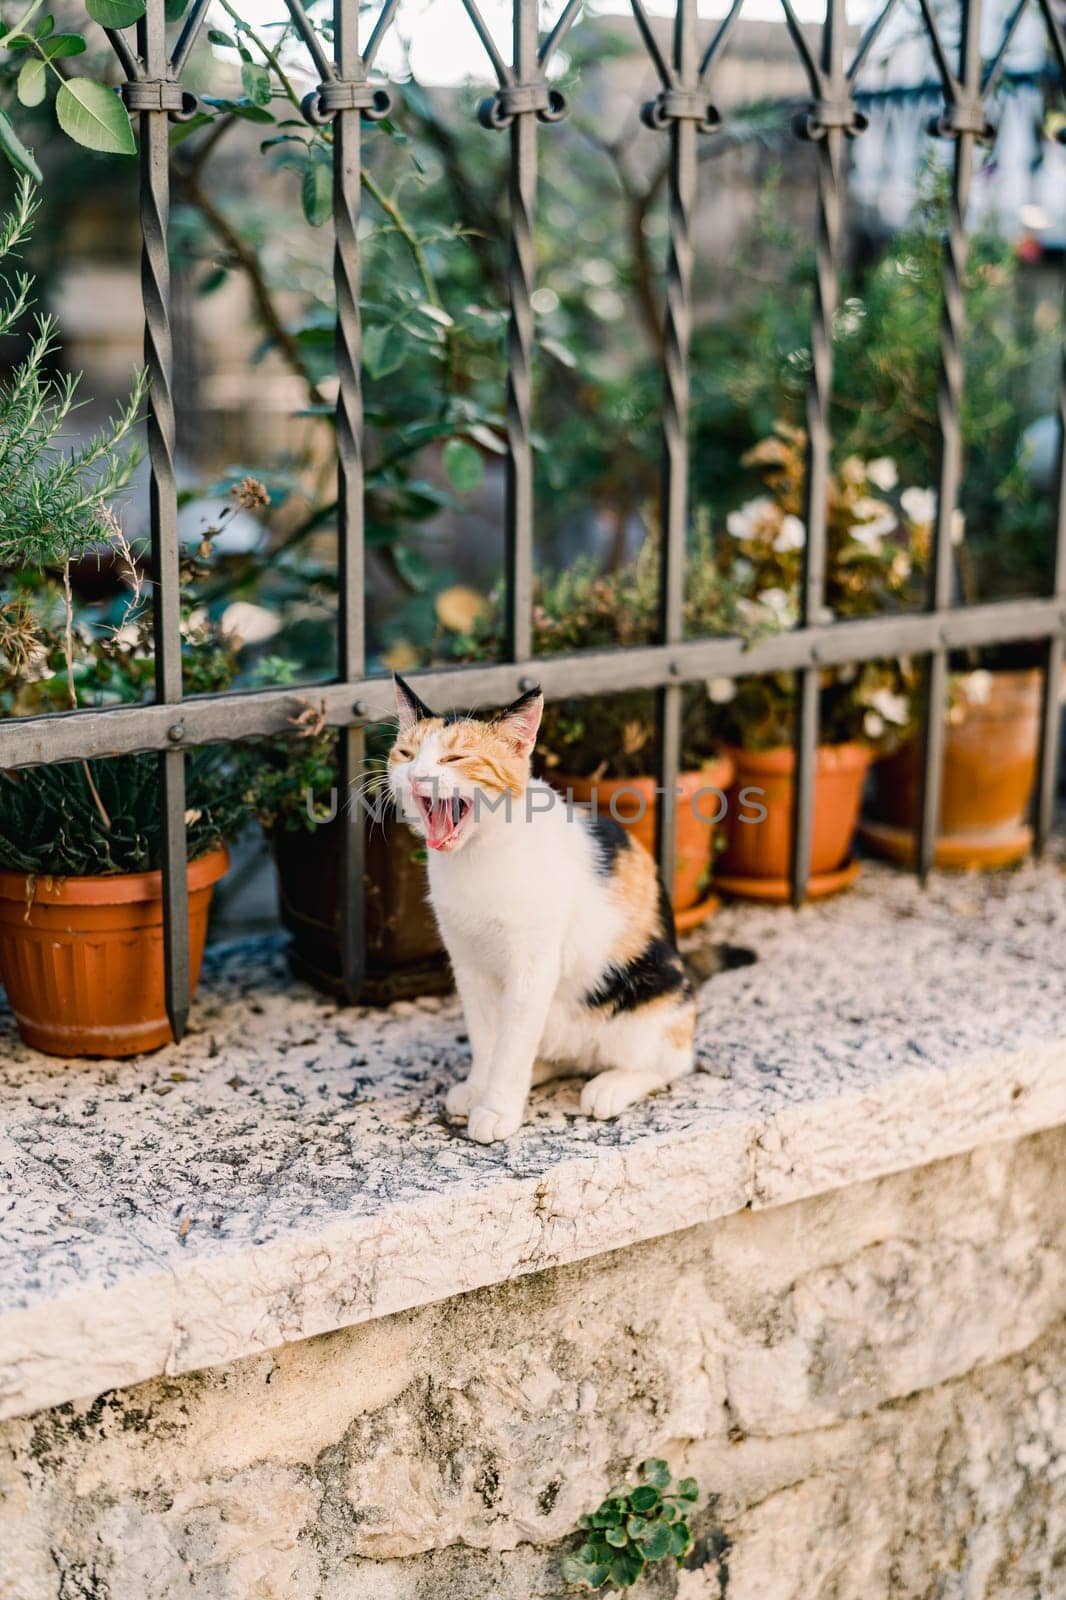 Tricolor cat yawns sitting on a garden fence near flowerpots by Nadtochiy